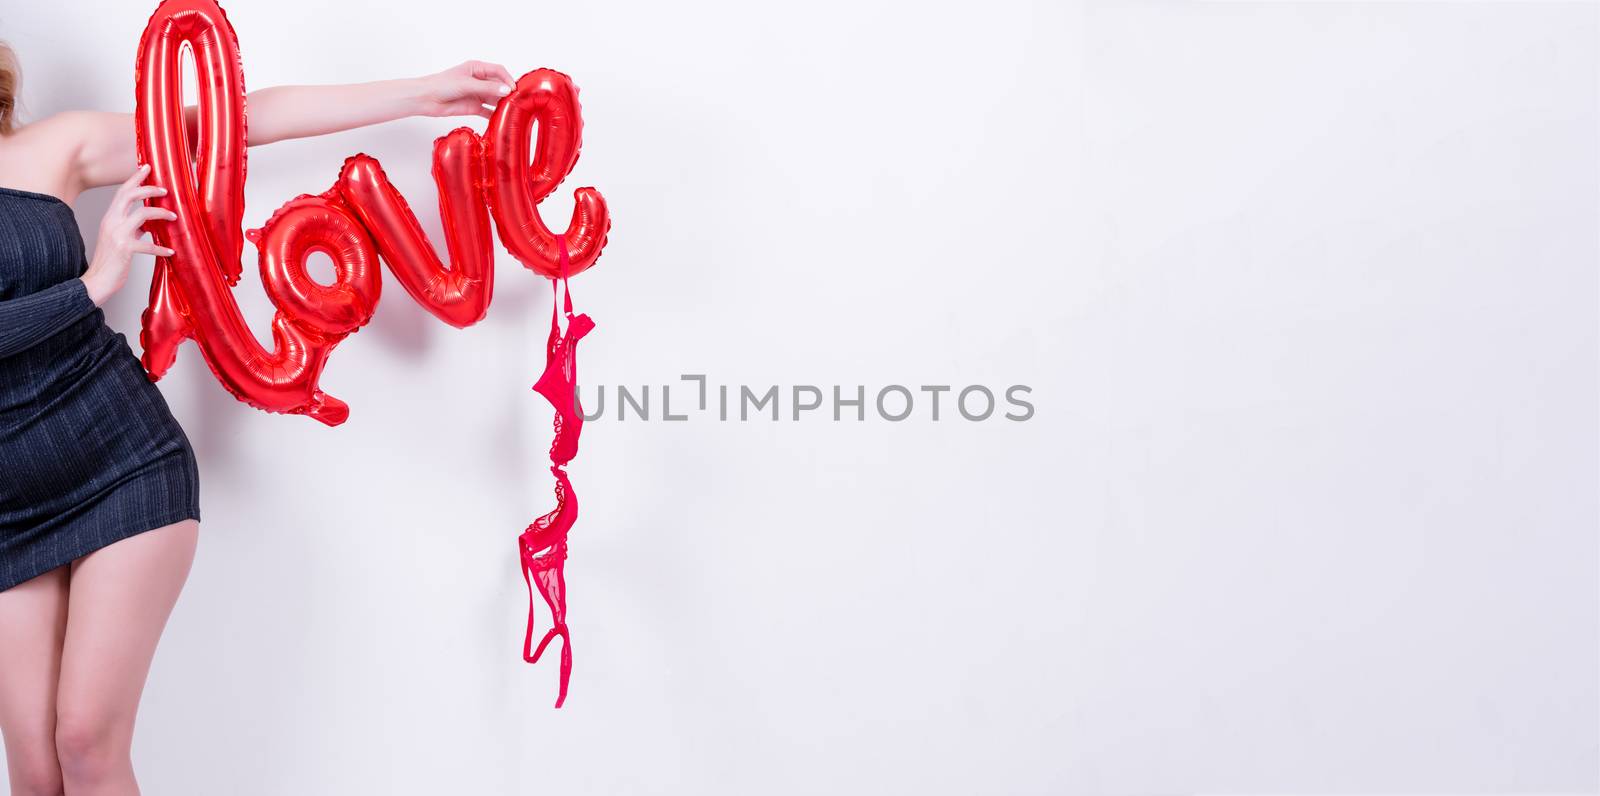 Attractive beautiful model woman holds love word letter shaped red balloon and red lingerie.Valentine's Day concept in studio on a white background.